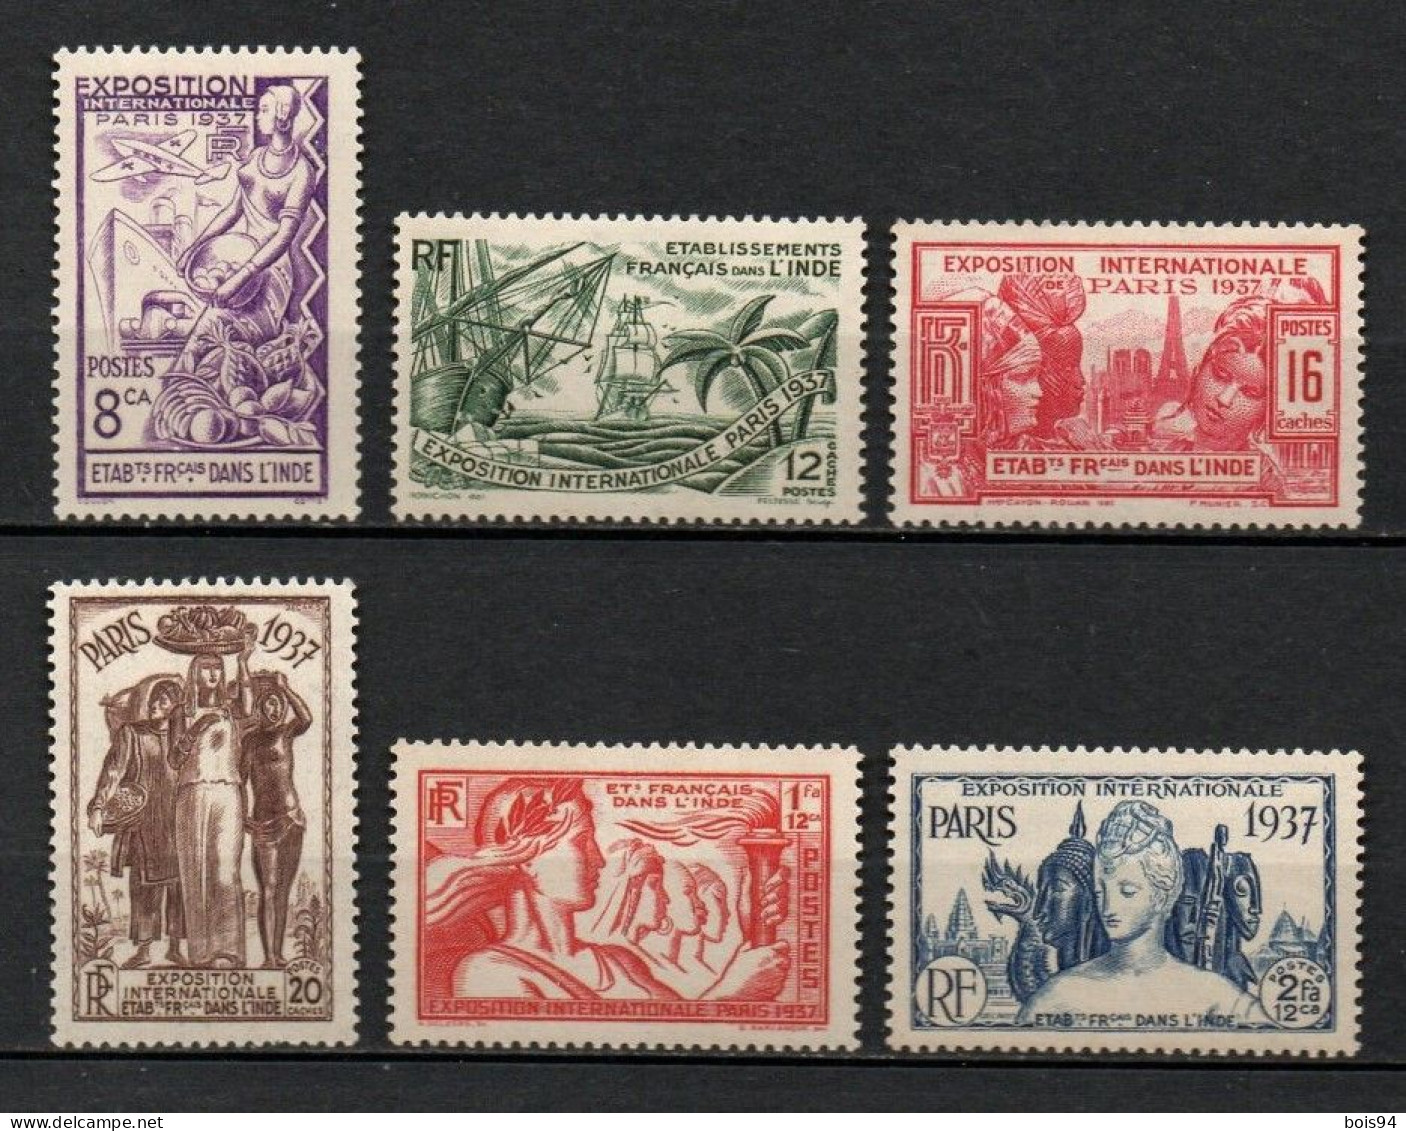 INDE 1937 .  Série N°s 109 à 114 .  Neufs ** (MNH) . - Unused Stamps